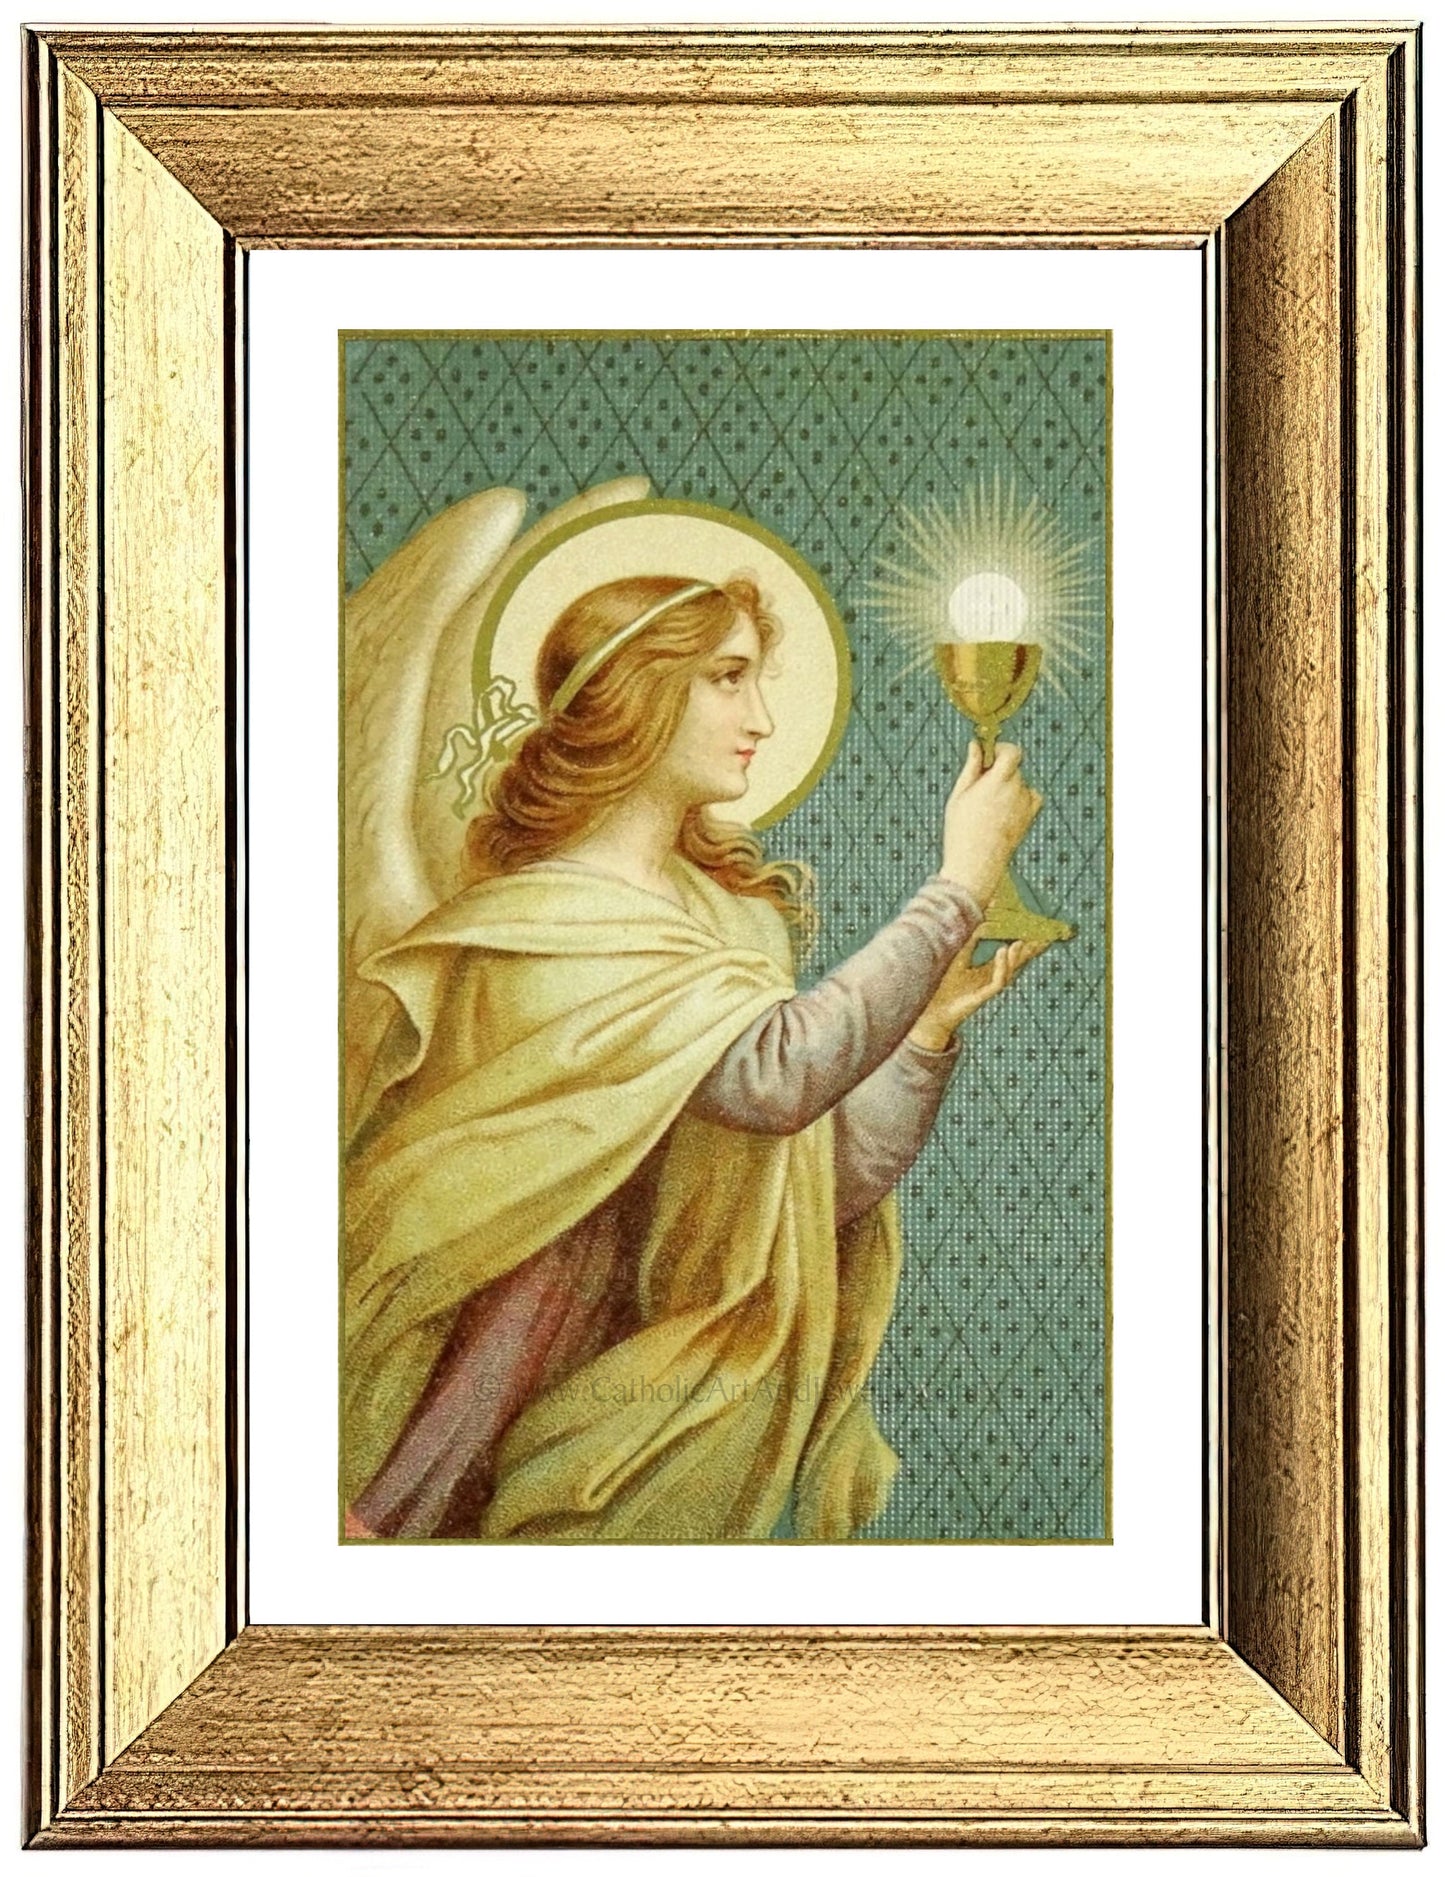 Bread of Angels – based on a Vintage French Holy Card – Catholic Art Print